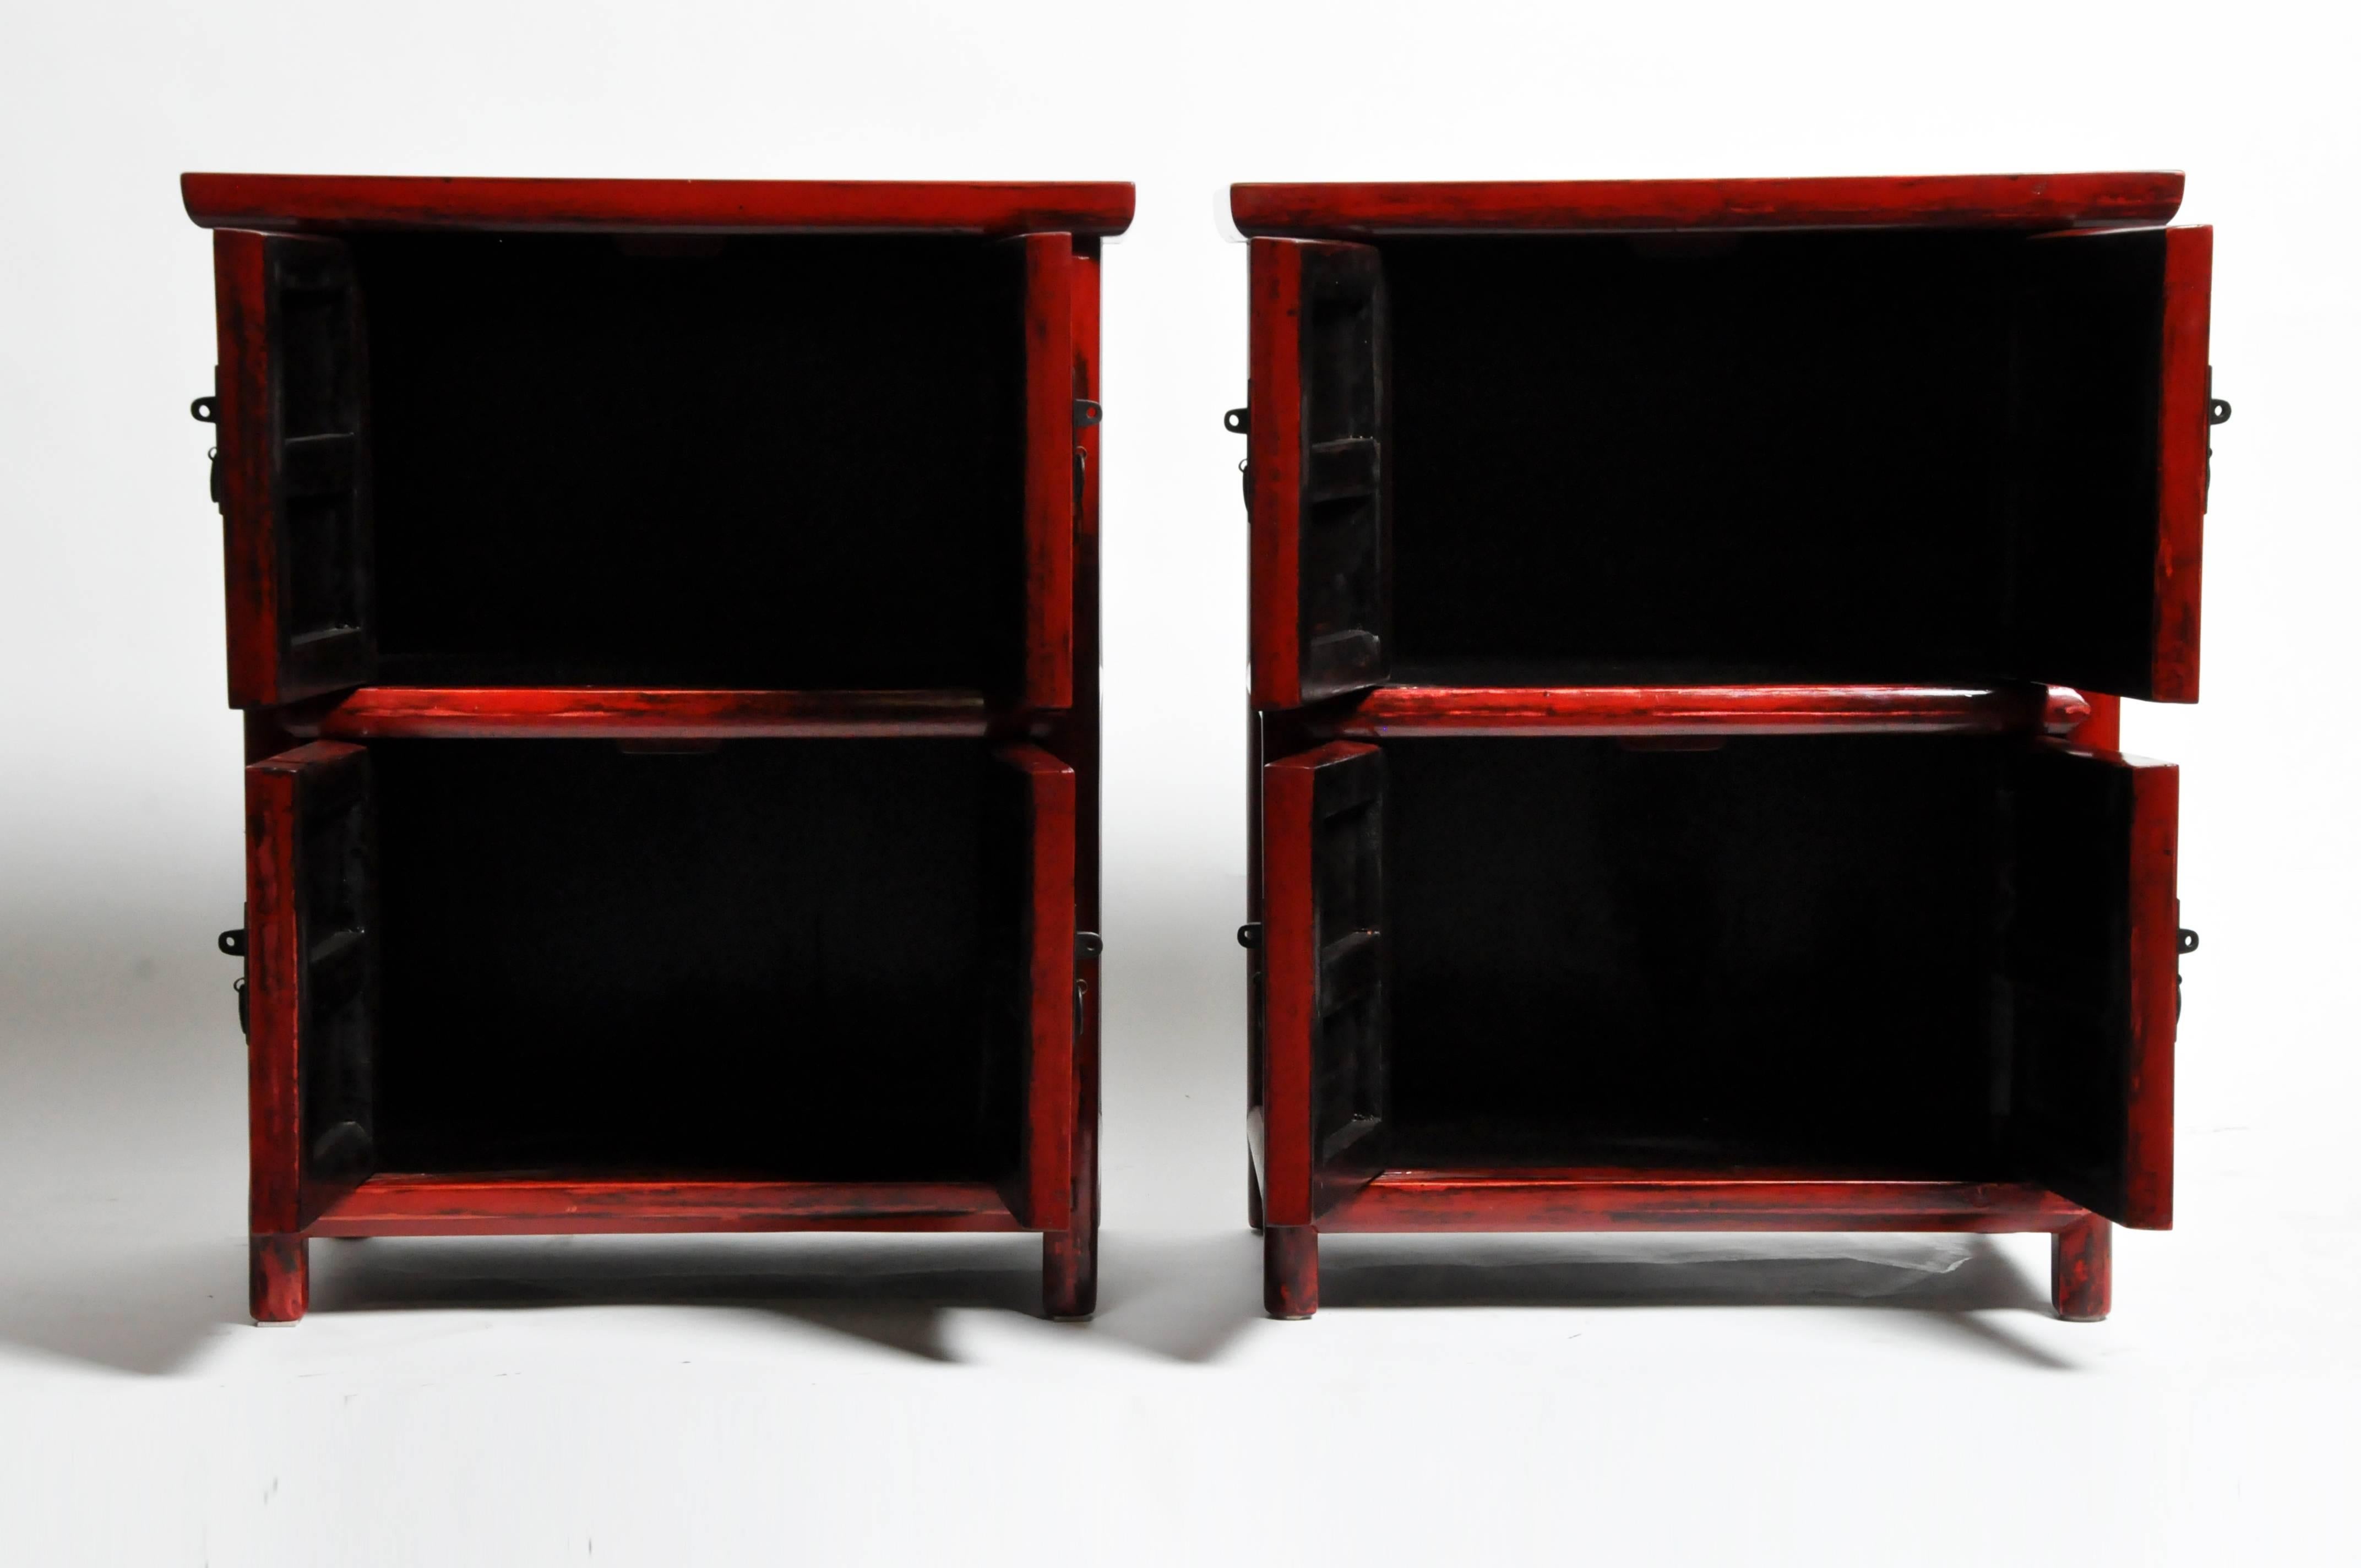 These Chinese side chests are from Jiangsu, China and was made from reclaimed elm wood and red lacquer utilizing mortise and tenon joinery. You can also customize it and make it your own. Wood, color, finish, and dimensions are all customizable.